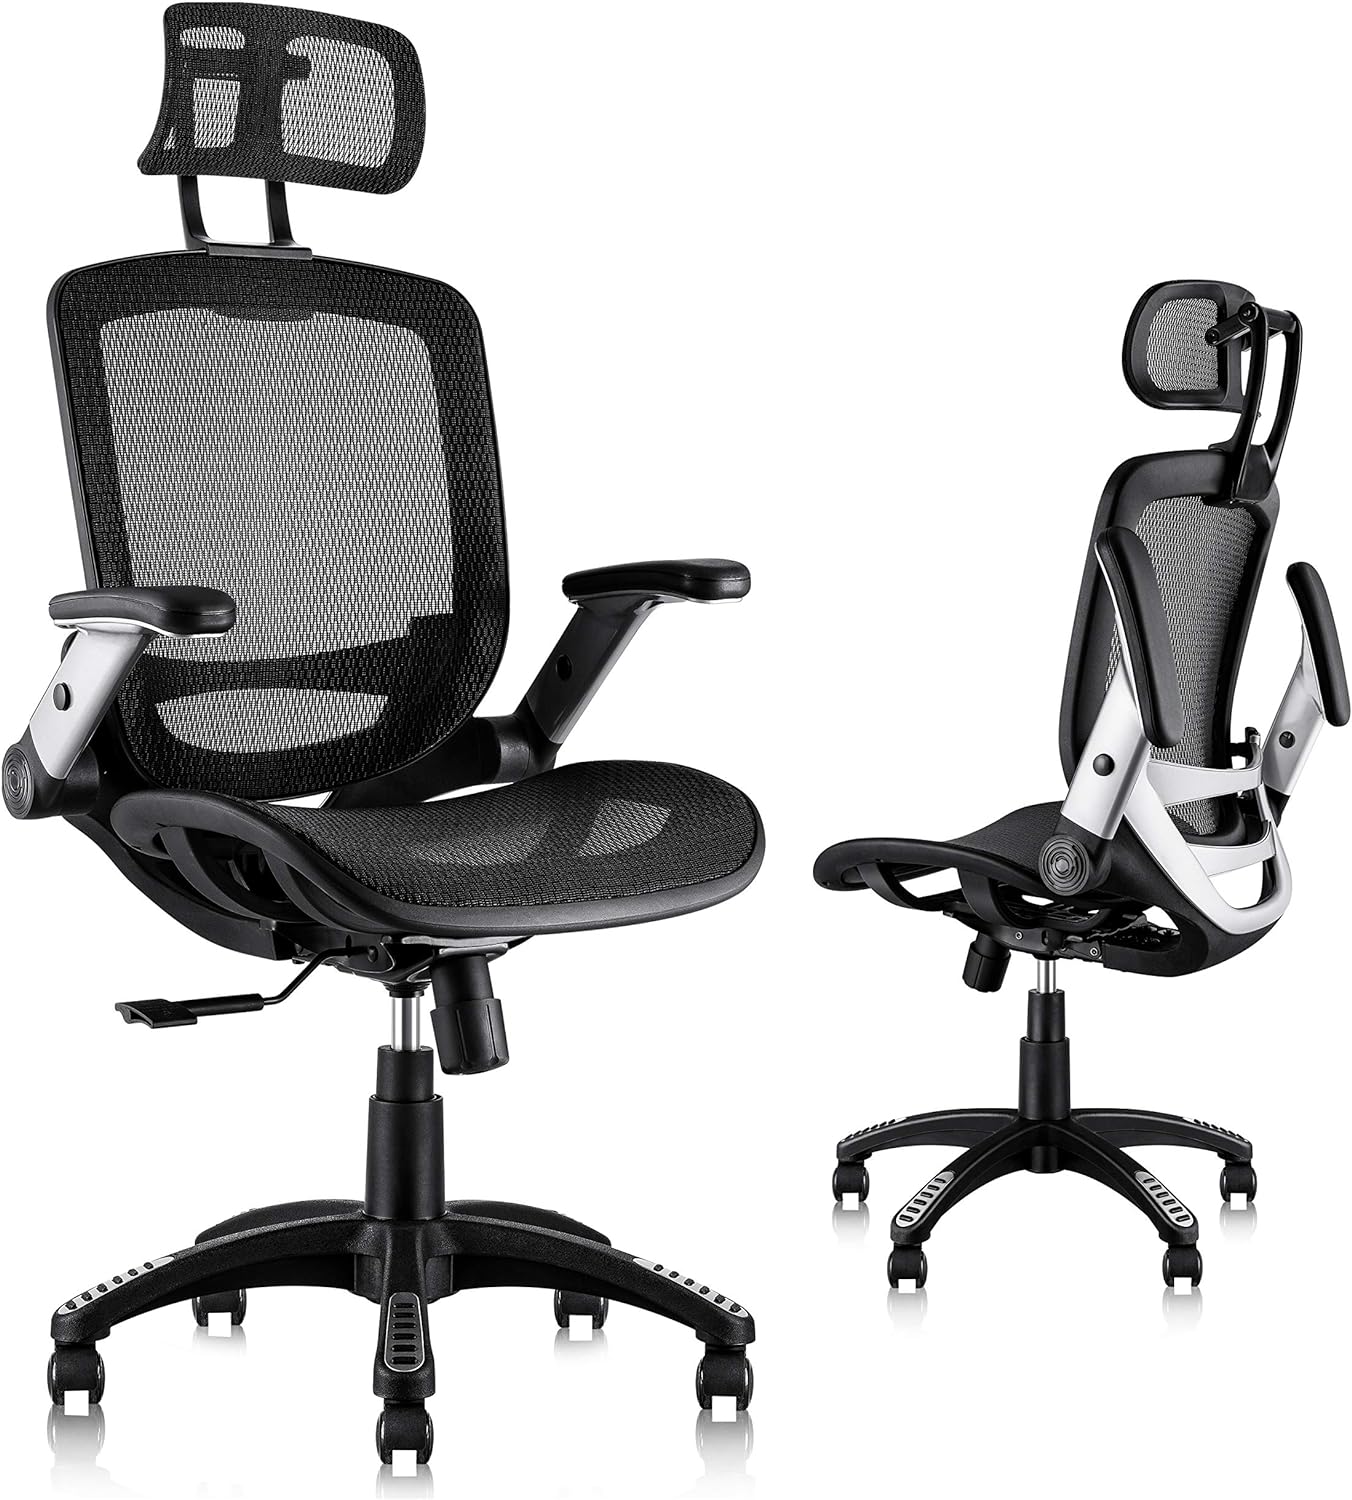 GABRYLLY Ergonomic Mesh Office Chair, High Back Desk Chair - Adjustable Headrest with Flip-Up Arms, Tilt Function, Lumbar Support and PU Wheels, Swivel Computer Task Chair